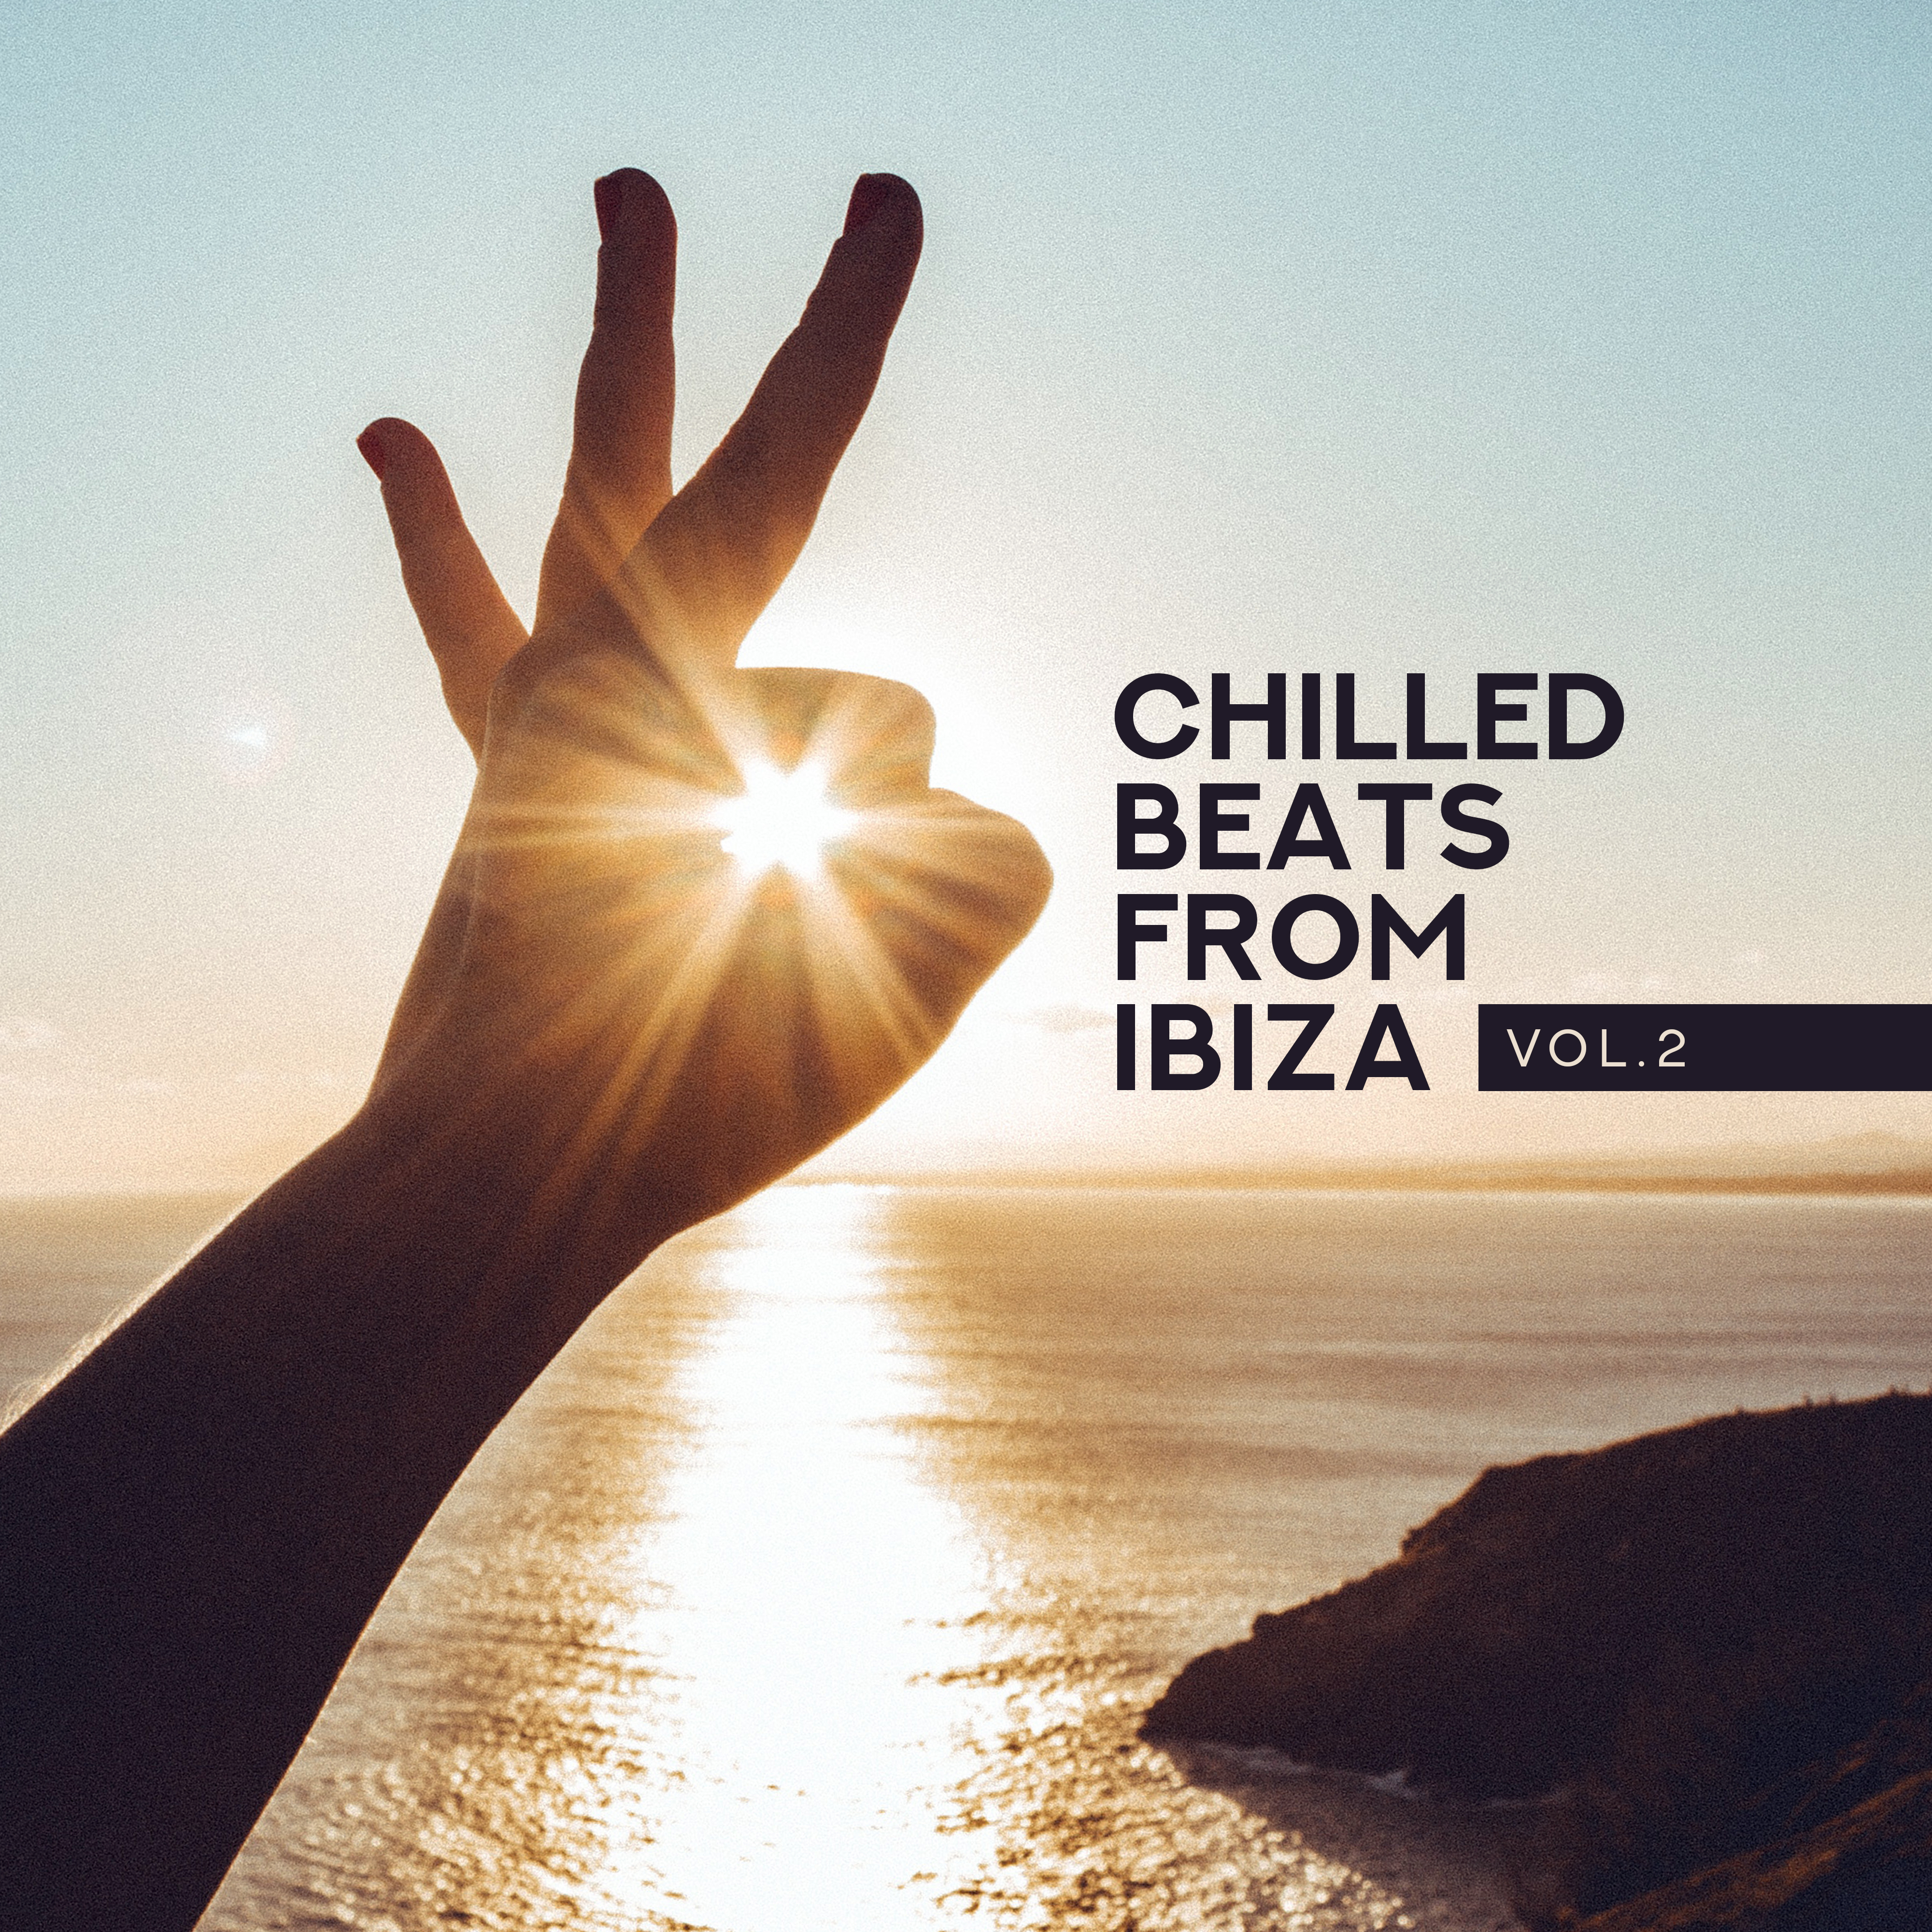 Chilled Beats from Ibiza vol.2